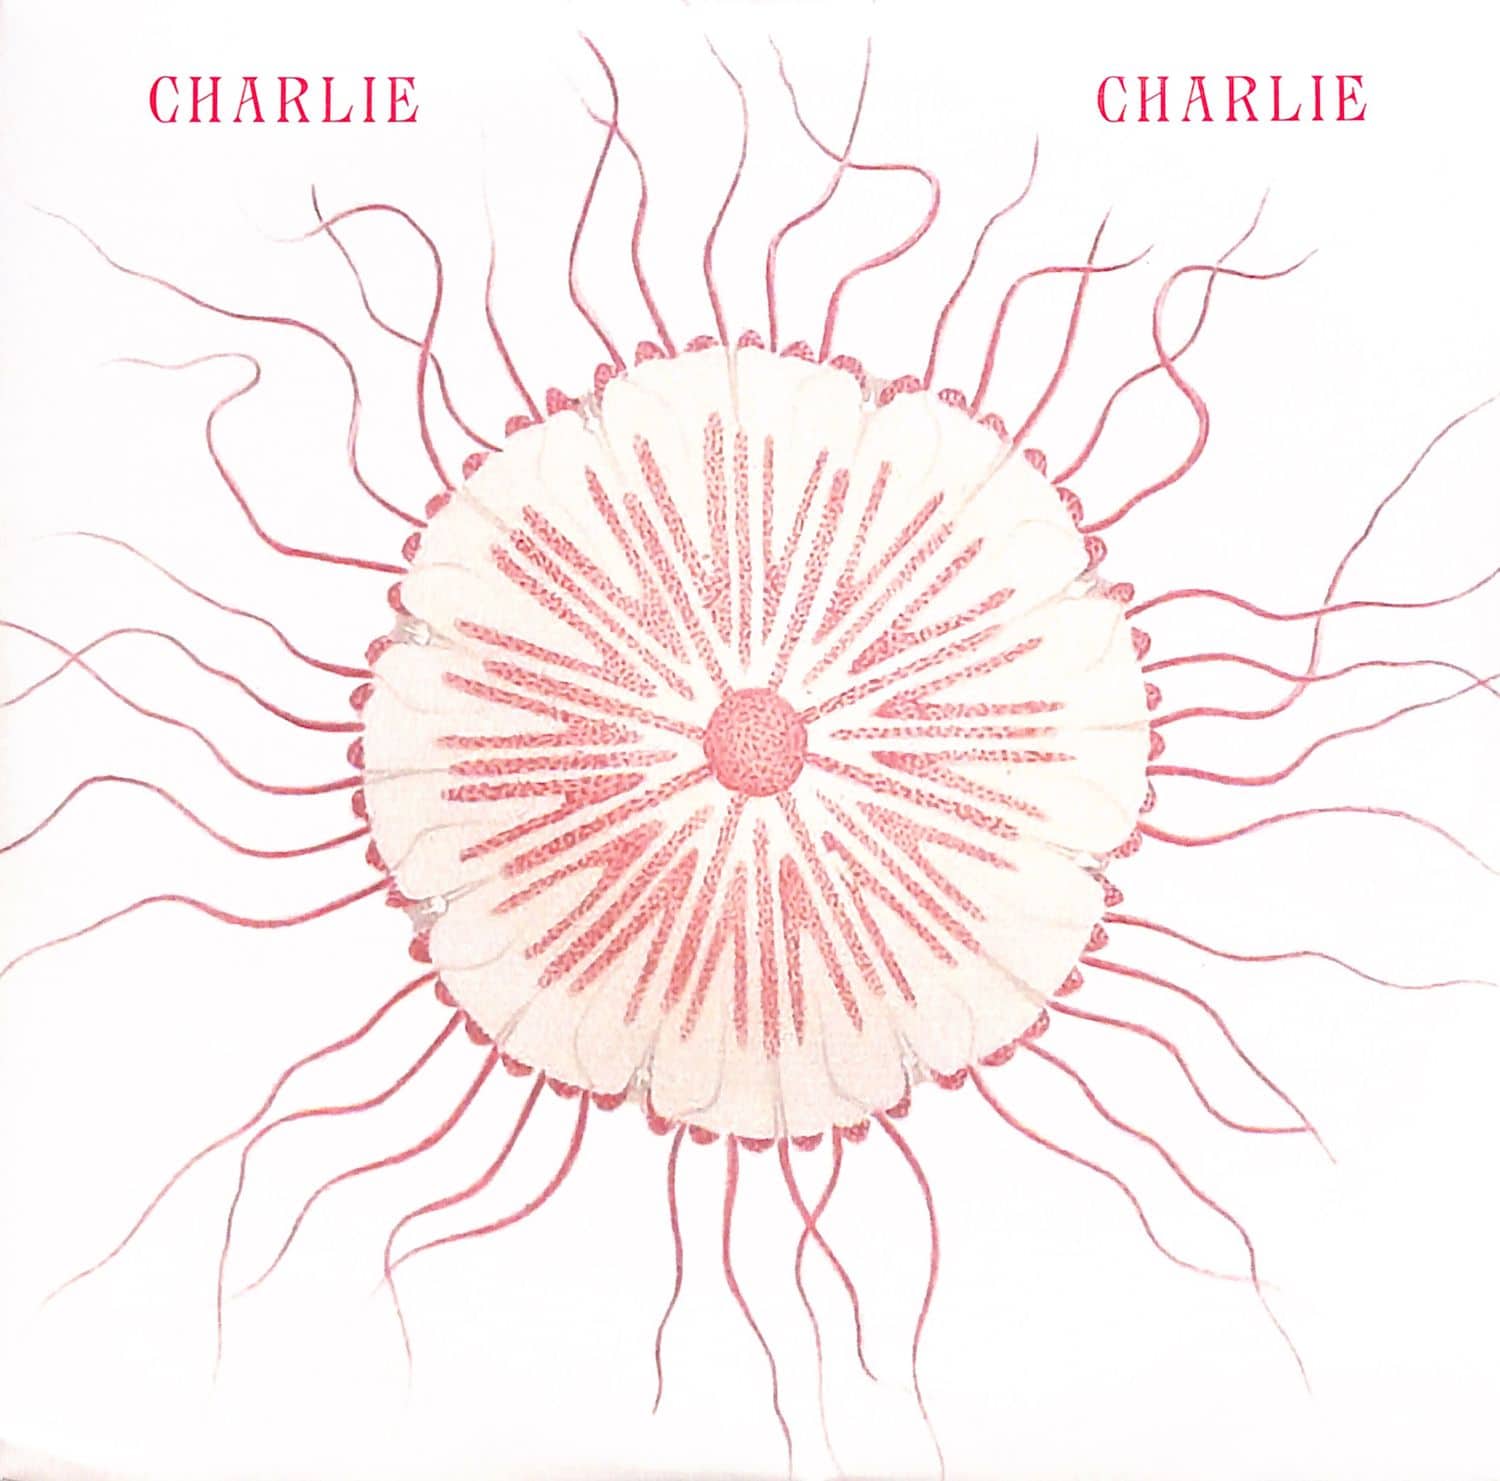 Charlie Charlie - SAVE US FEAT MAPEI / CHARLY 